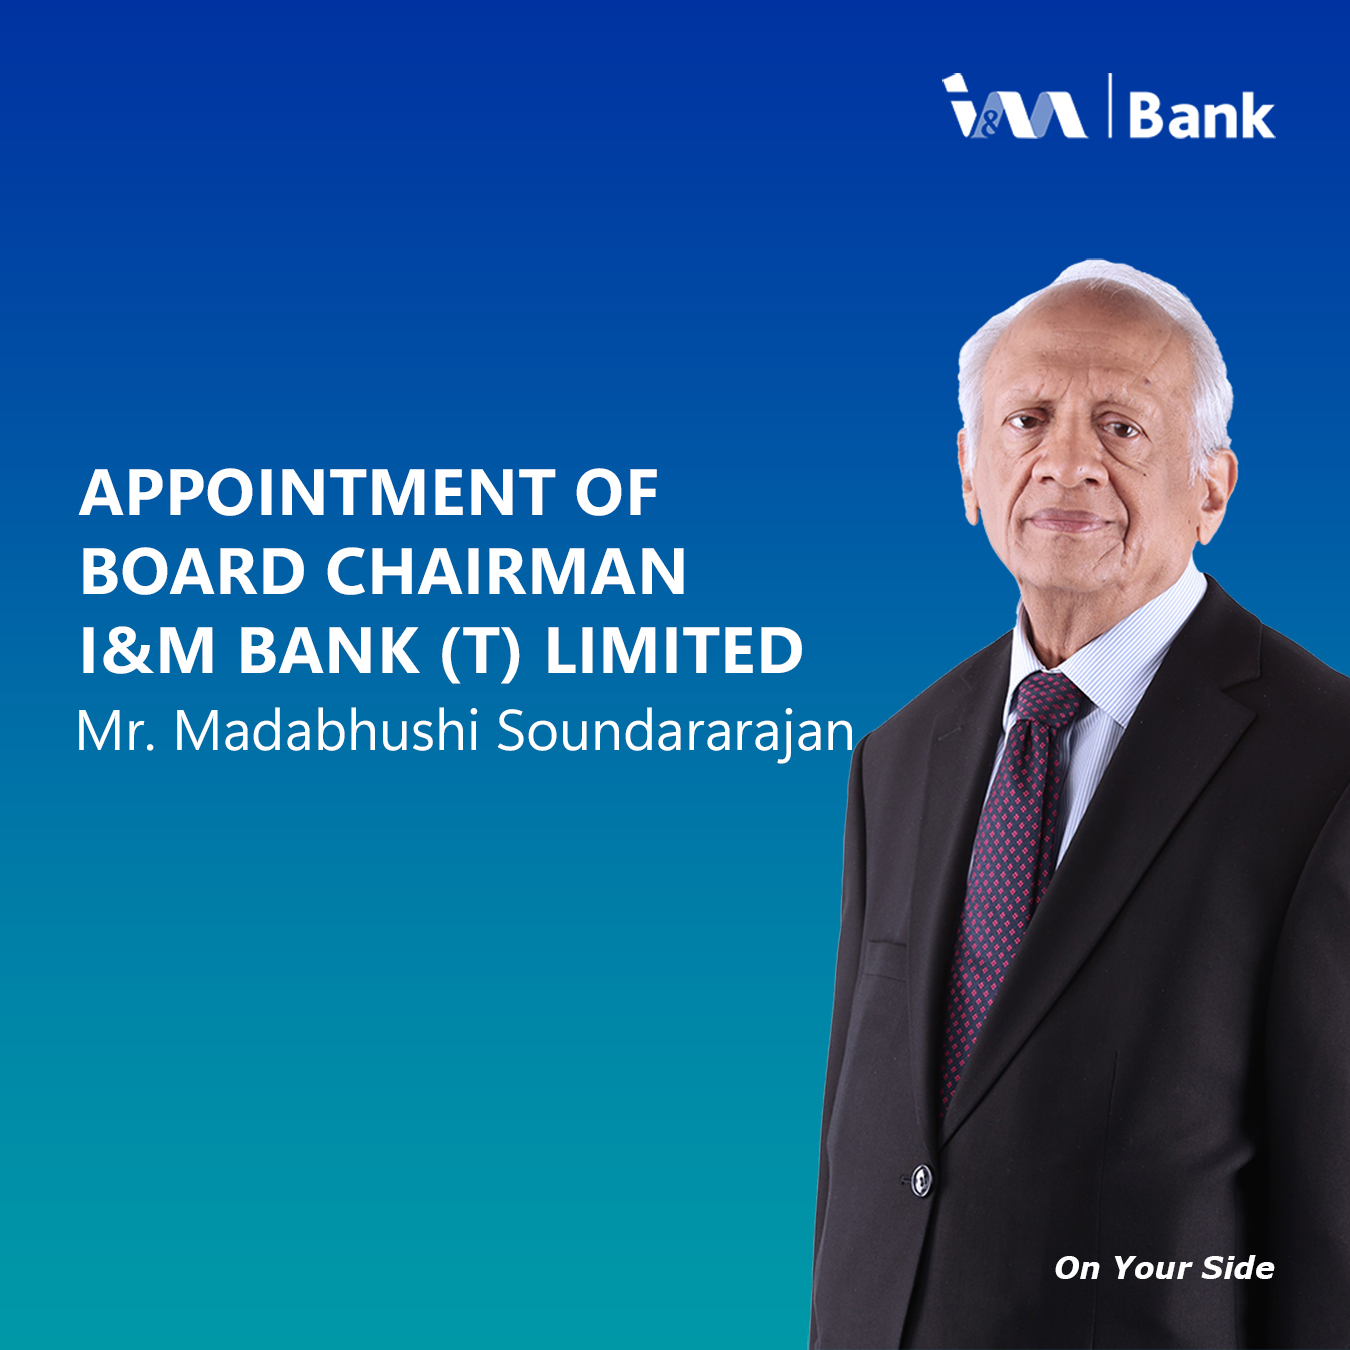 APPOINTMENT OF BOARD CHAIRMAN I&M BANK (T) LIMITED.